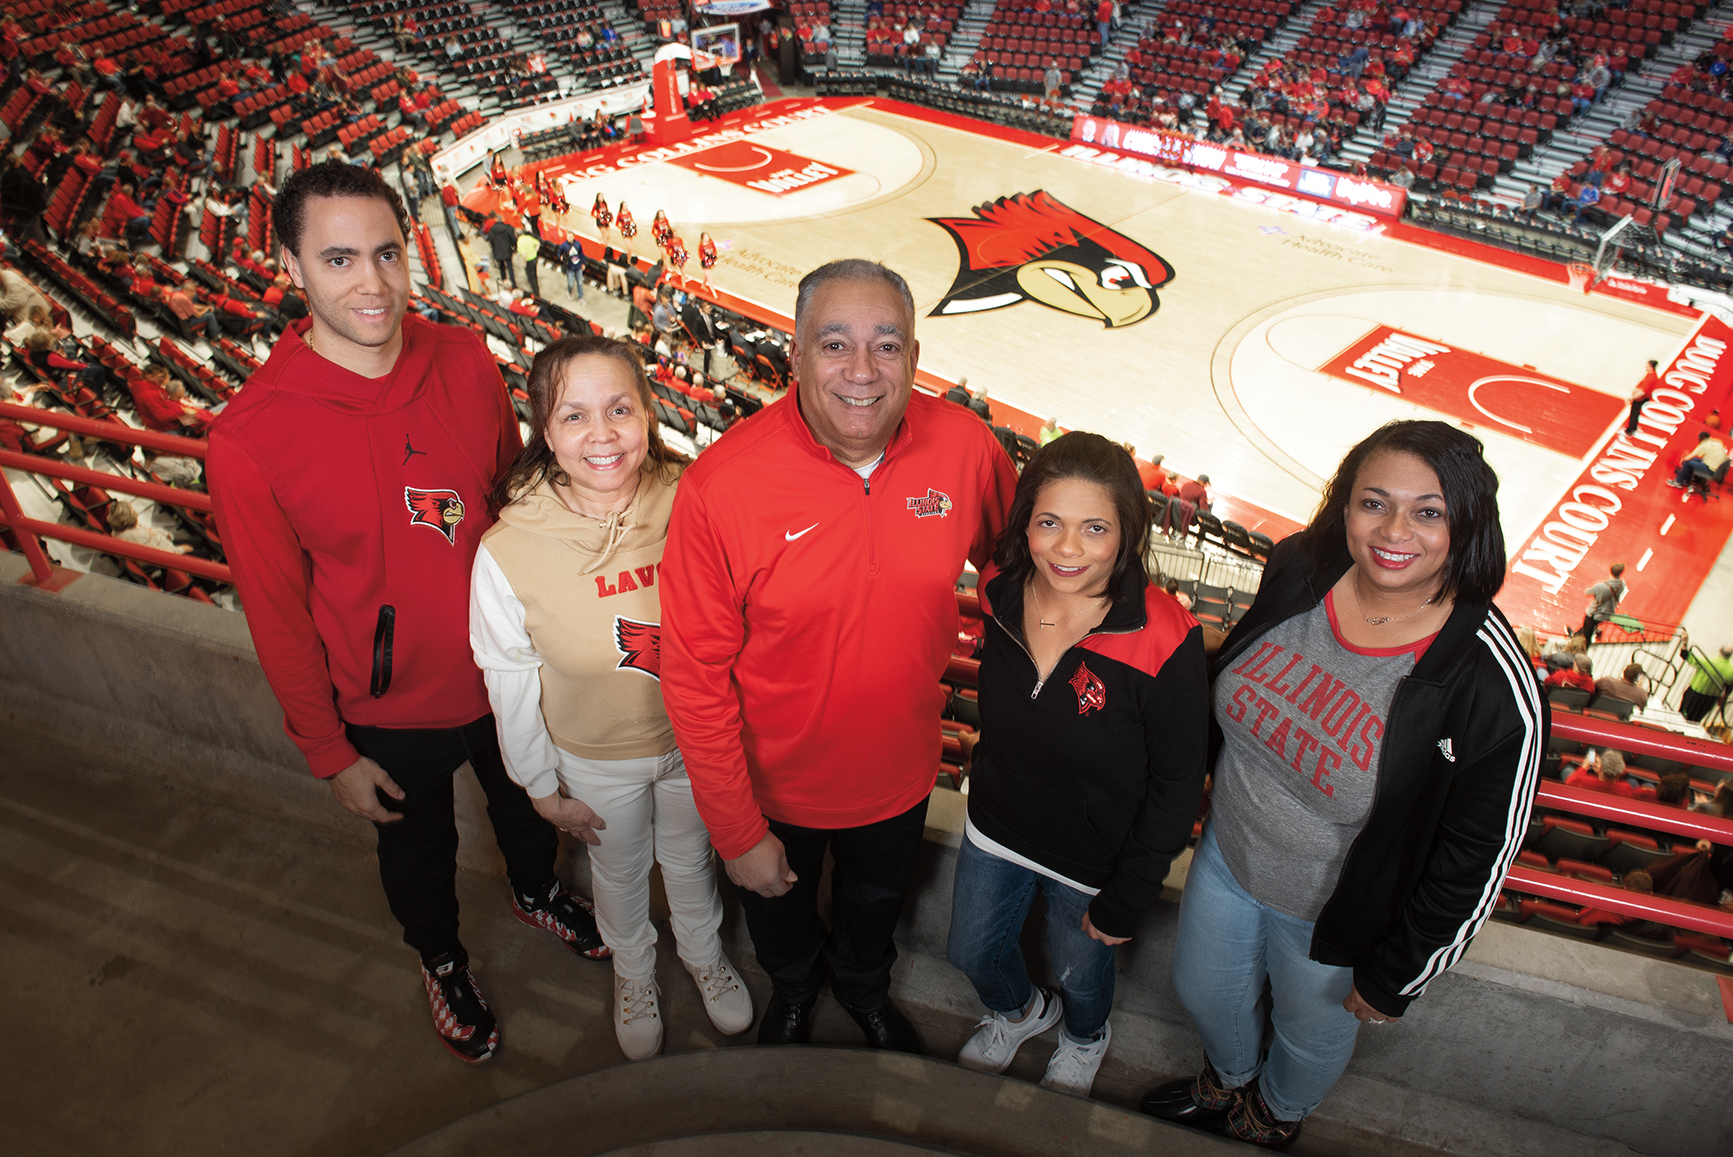 Avid Redbird basketball fans, the Jones family has attended the men’s basketball Missouri Valley Conference Tournament for 19 years. They cheer on the team at home as well, and are pictured in Redbird Arena. They are, from left, Kevin Guidry-Jones ’14, Abigail Jones, Michael Jones ’92, Tracy Jones ’03, and Ericka Jones-Carter ’02. Redbird Arena